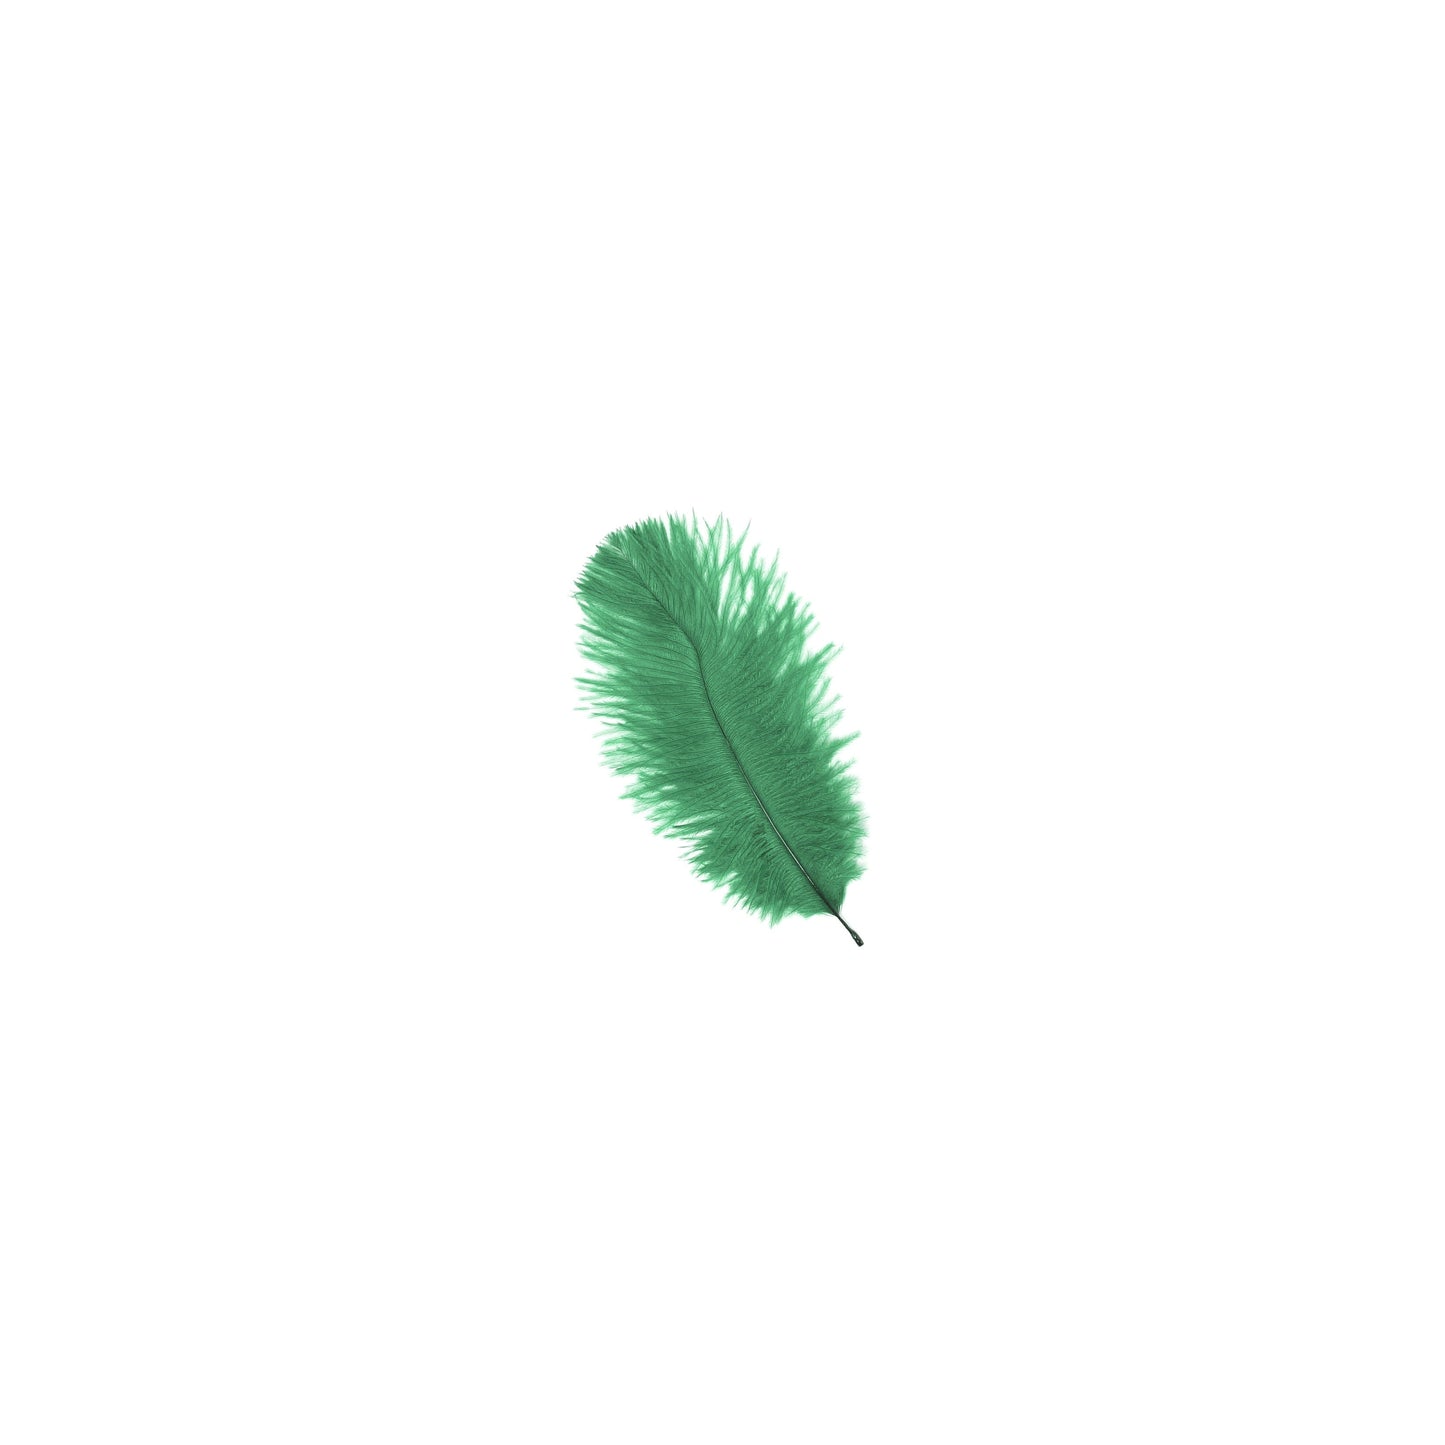 Ostrich Feathers 4-8" Drabs - Emerald